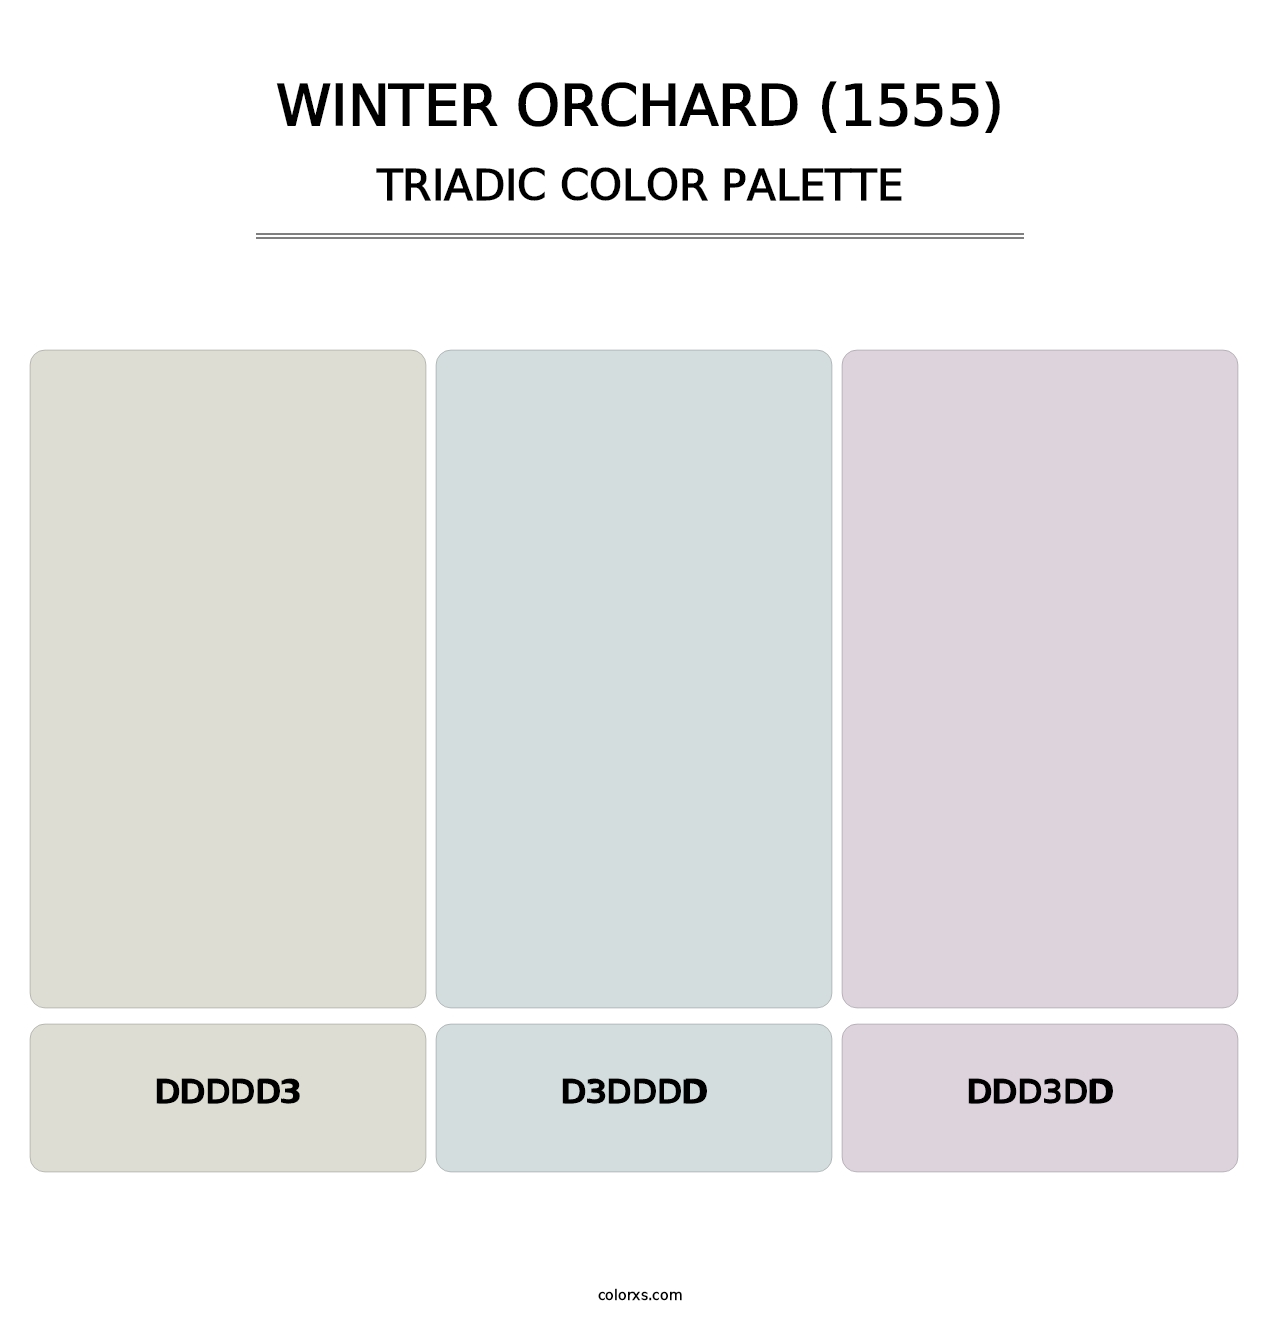 Winter Orchard (1555) - Triadic Color Palette